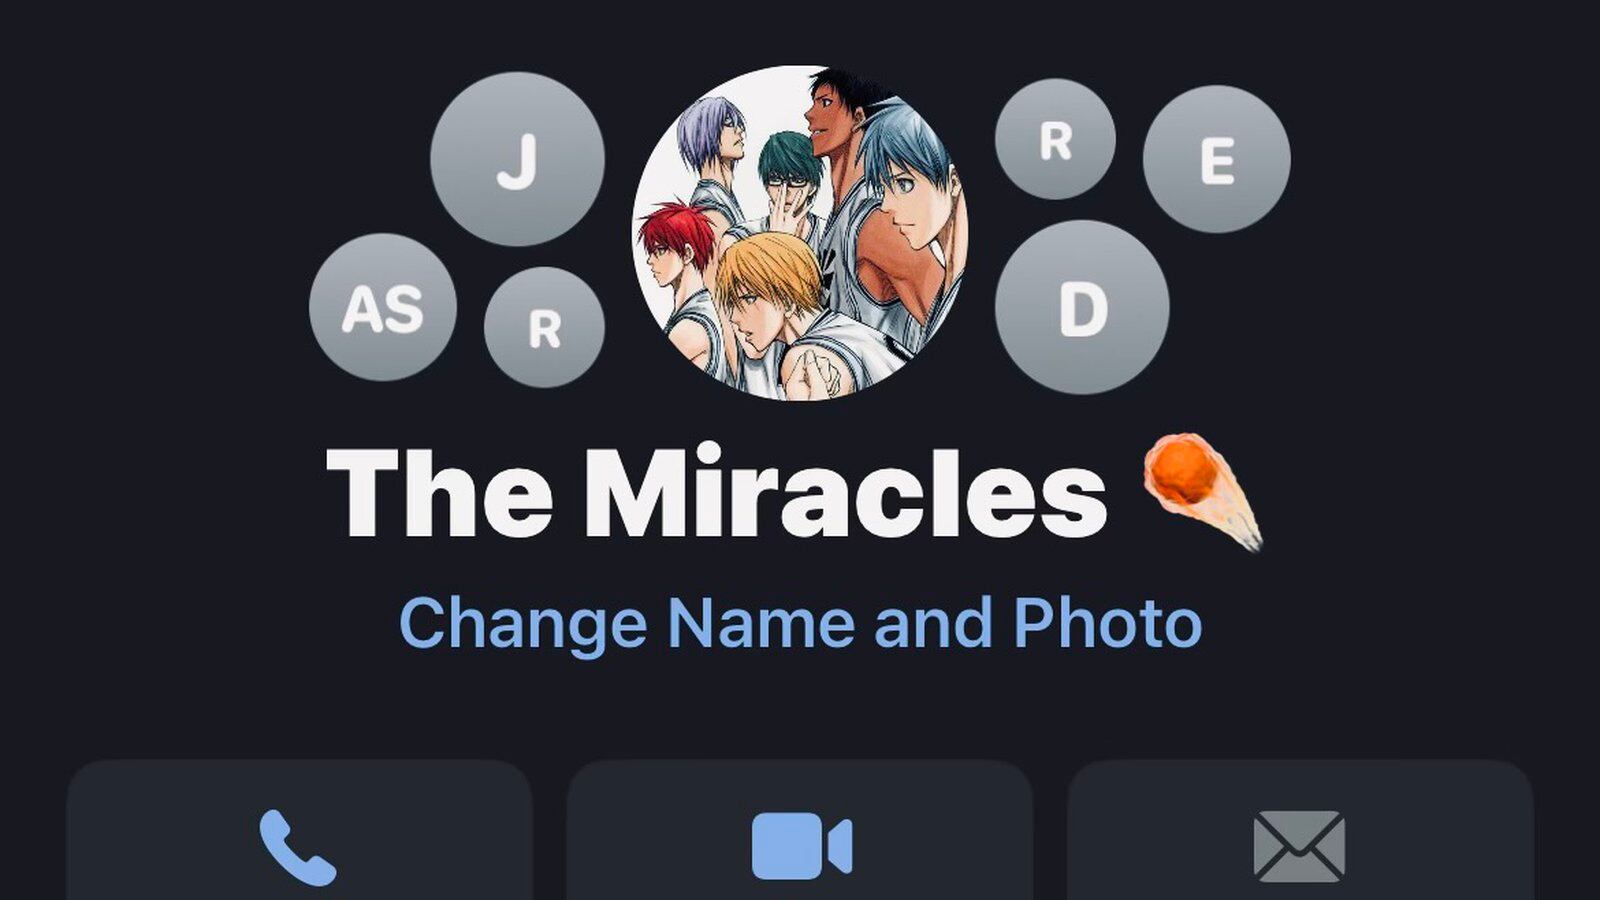 Screenshot of a group chat titled “The Miracles”